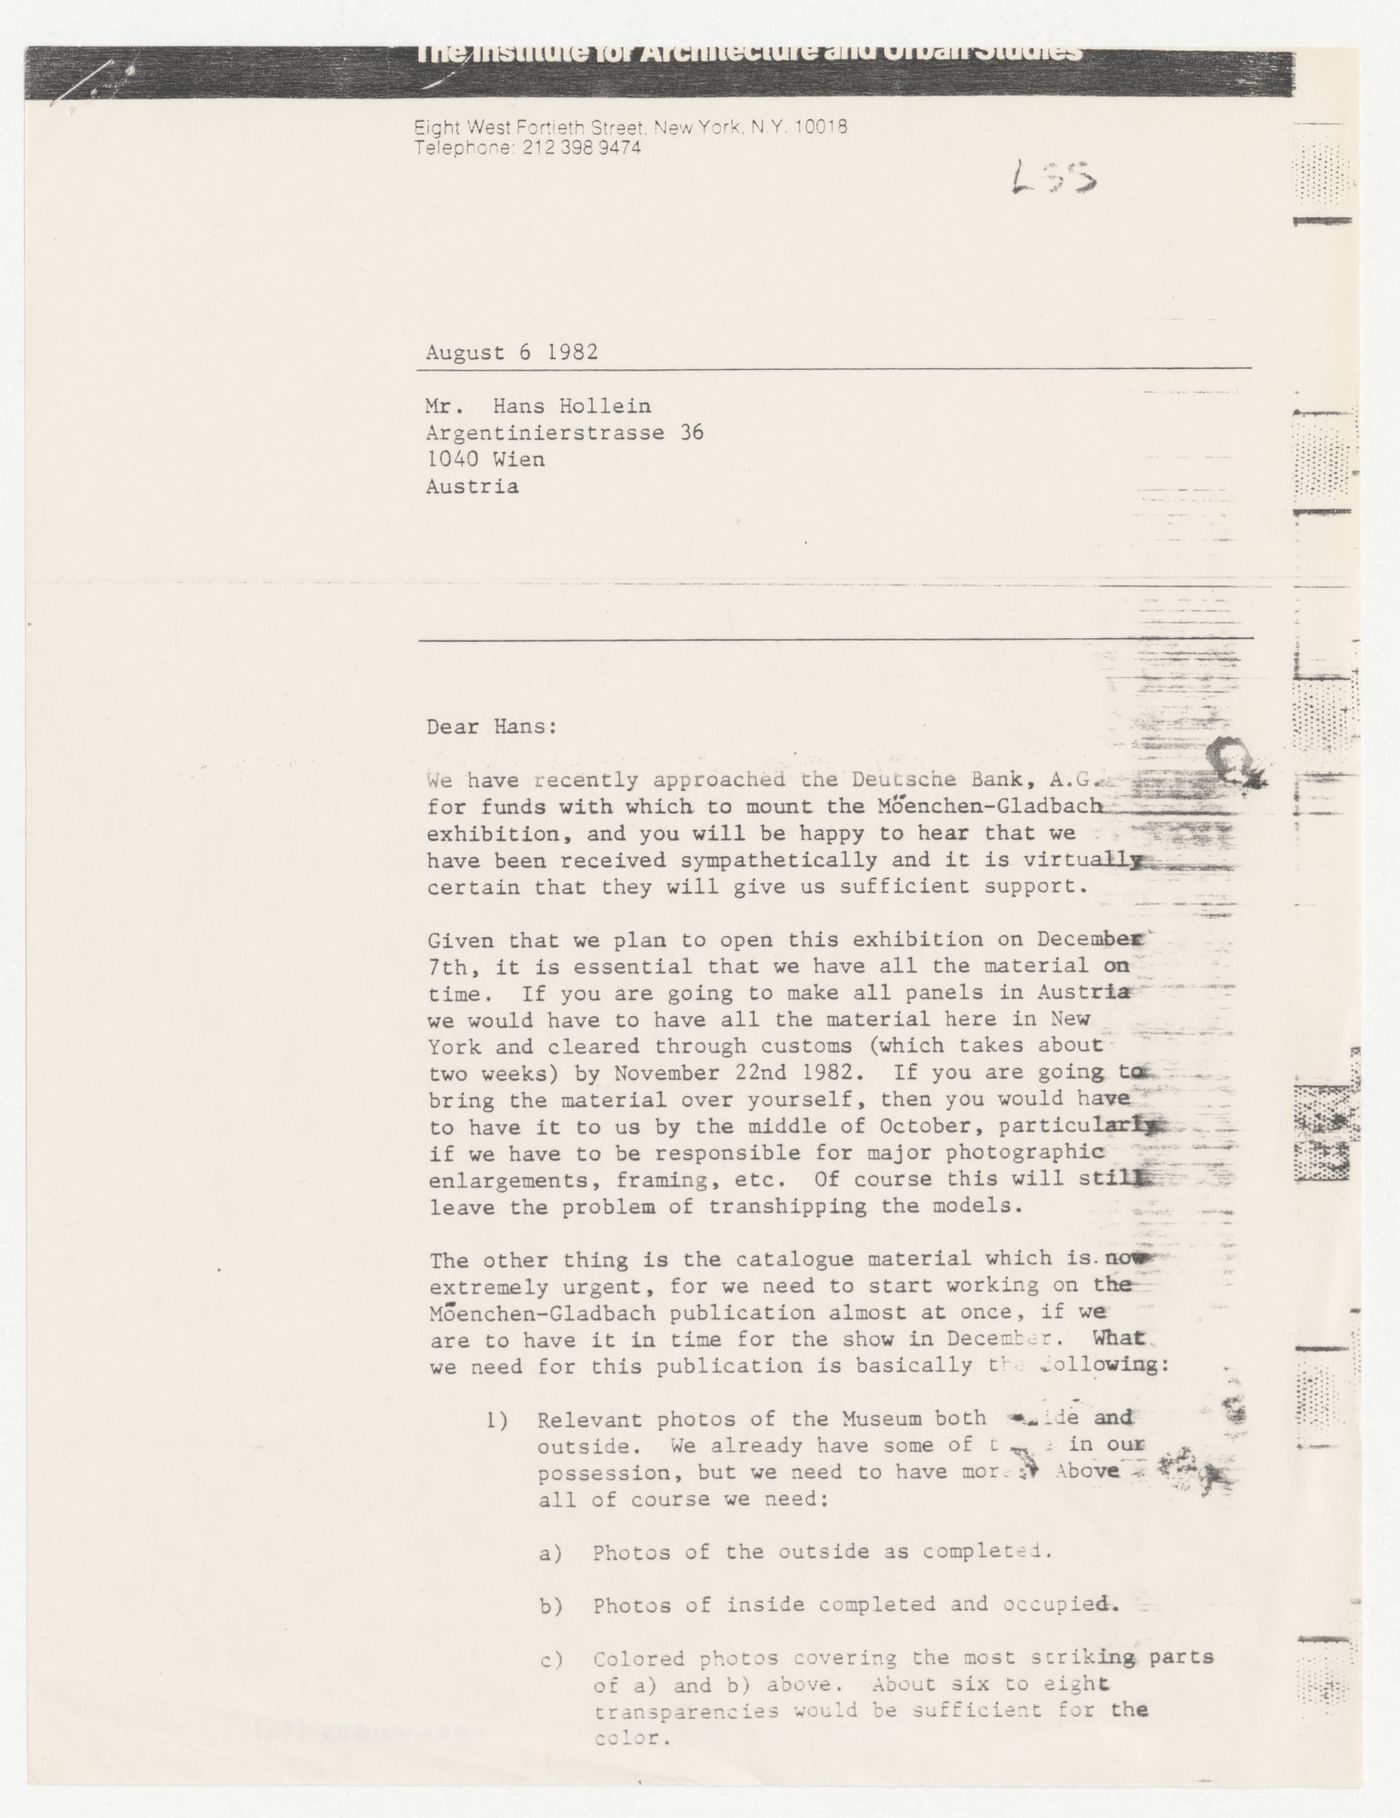 Letter from Edith L. Morrill to Hans Hollein about Möenchen-Gladbach exhibition and catalogue